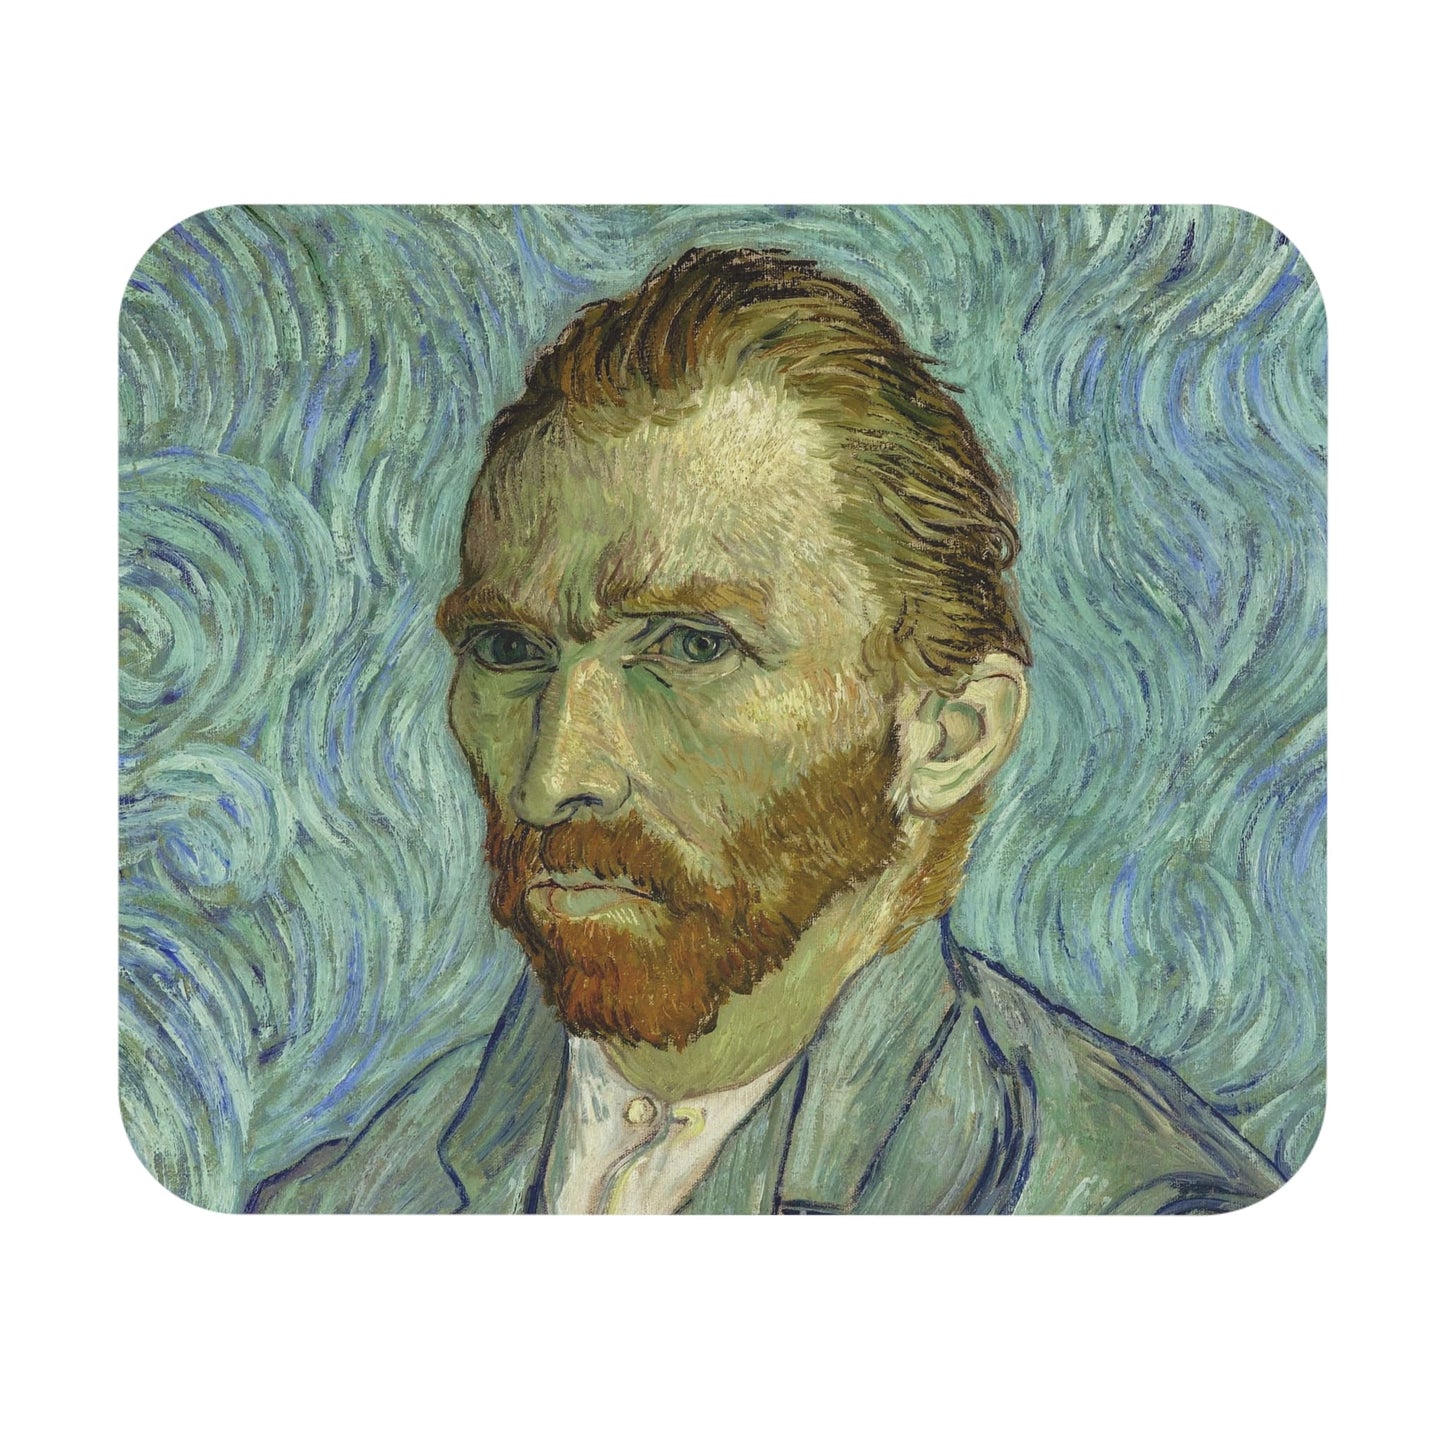 Van Gogh Self Portrait Mouse Pad featuring eclectic art, adding artistic flair to desk and office decor.